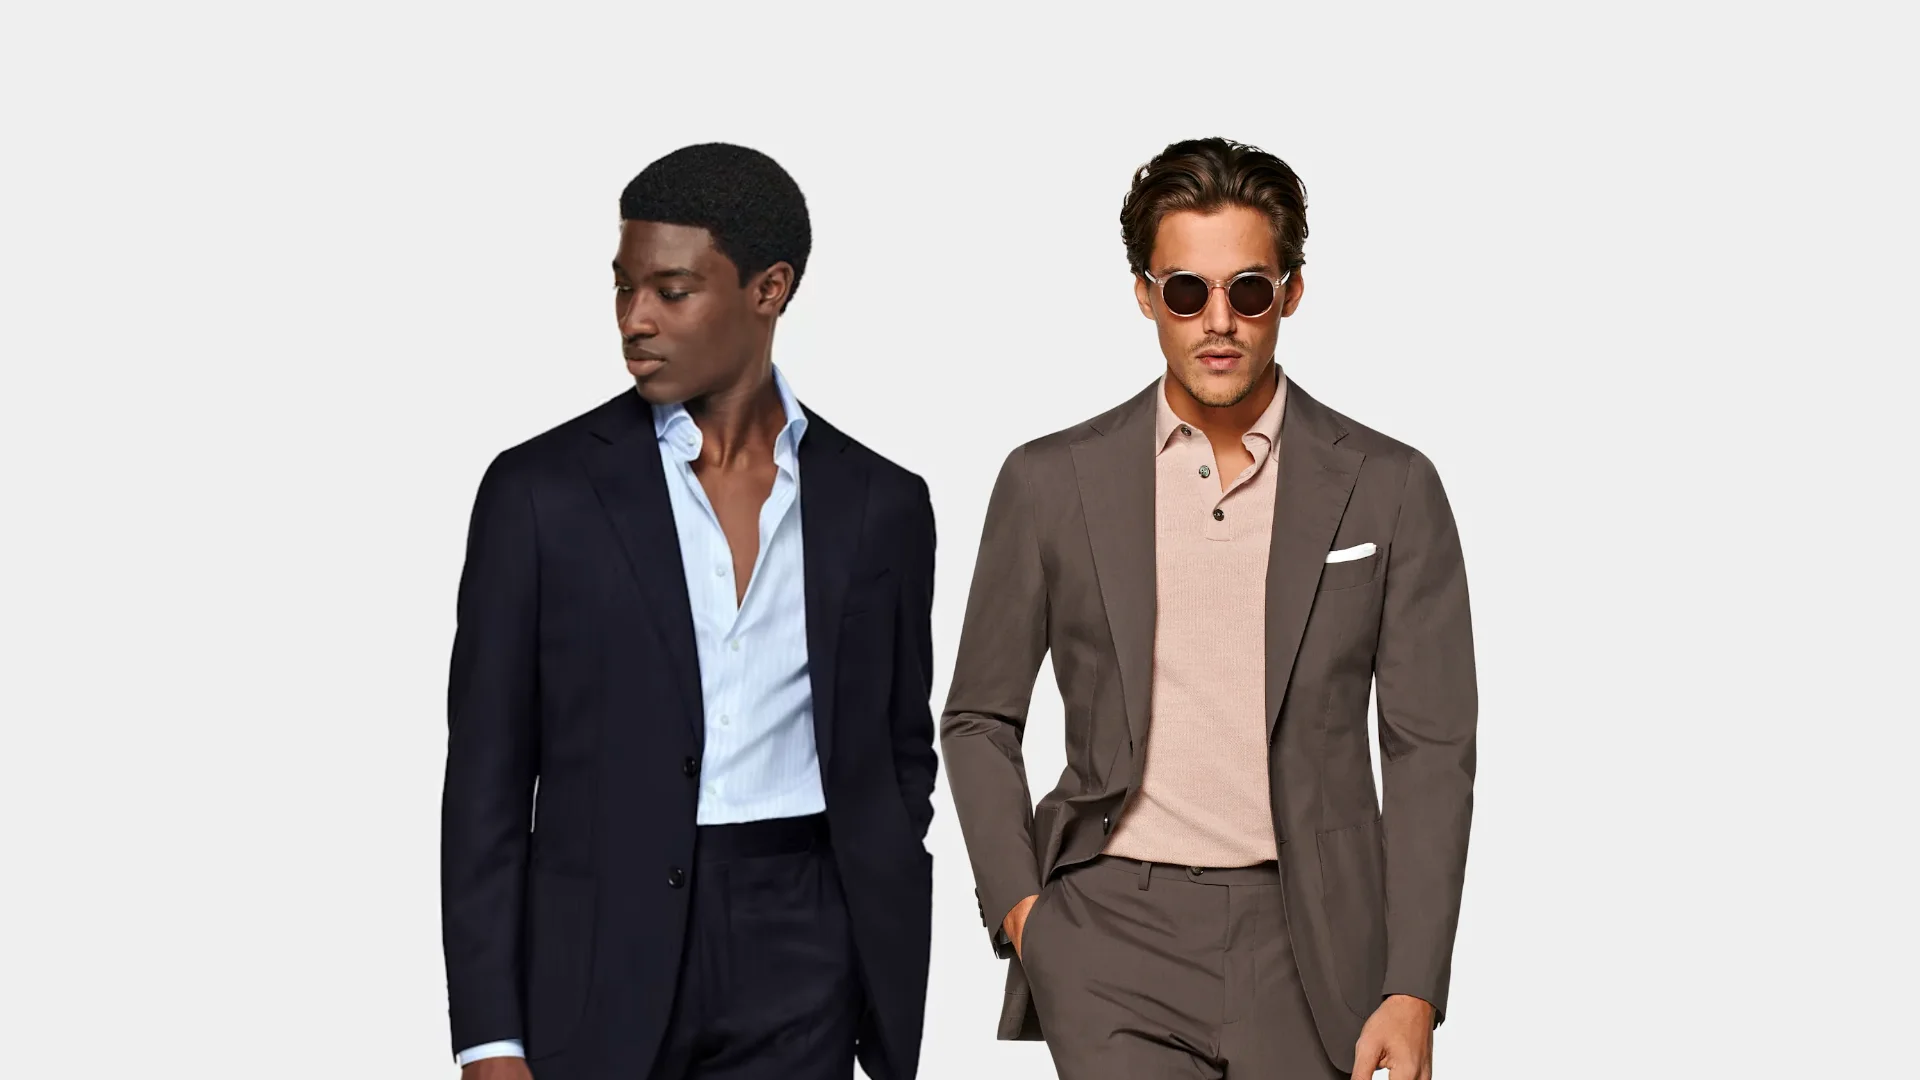 How to Wear a Suit Without a Tie: Step-by-Step Guide